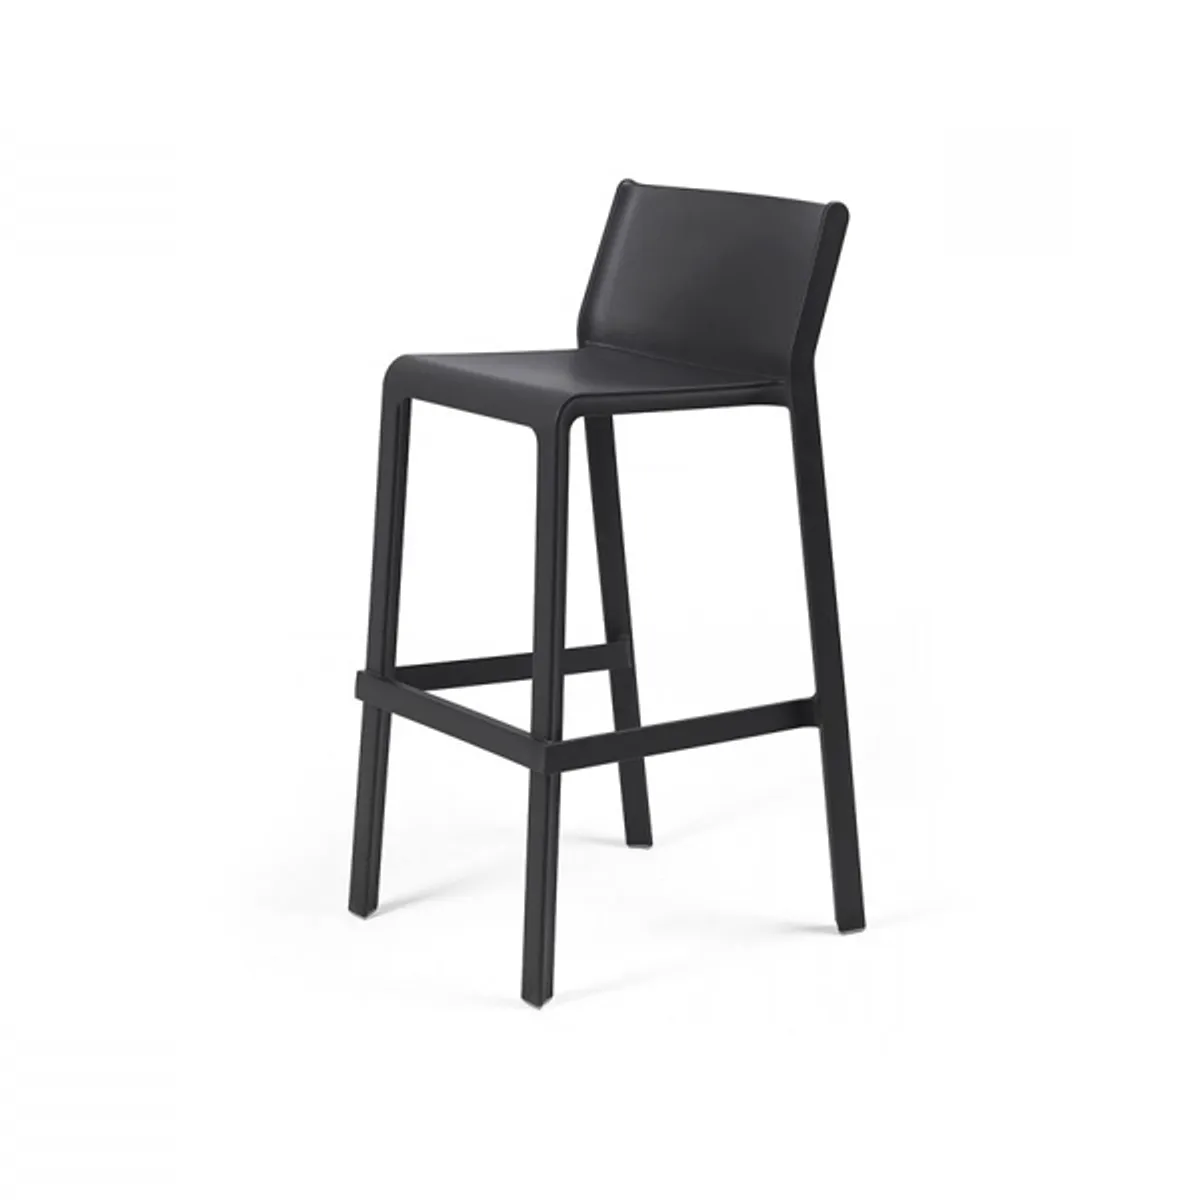 Trill bar stool Inside Out Contracts2